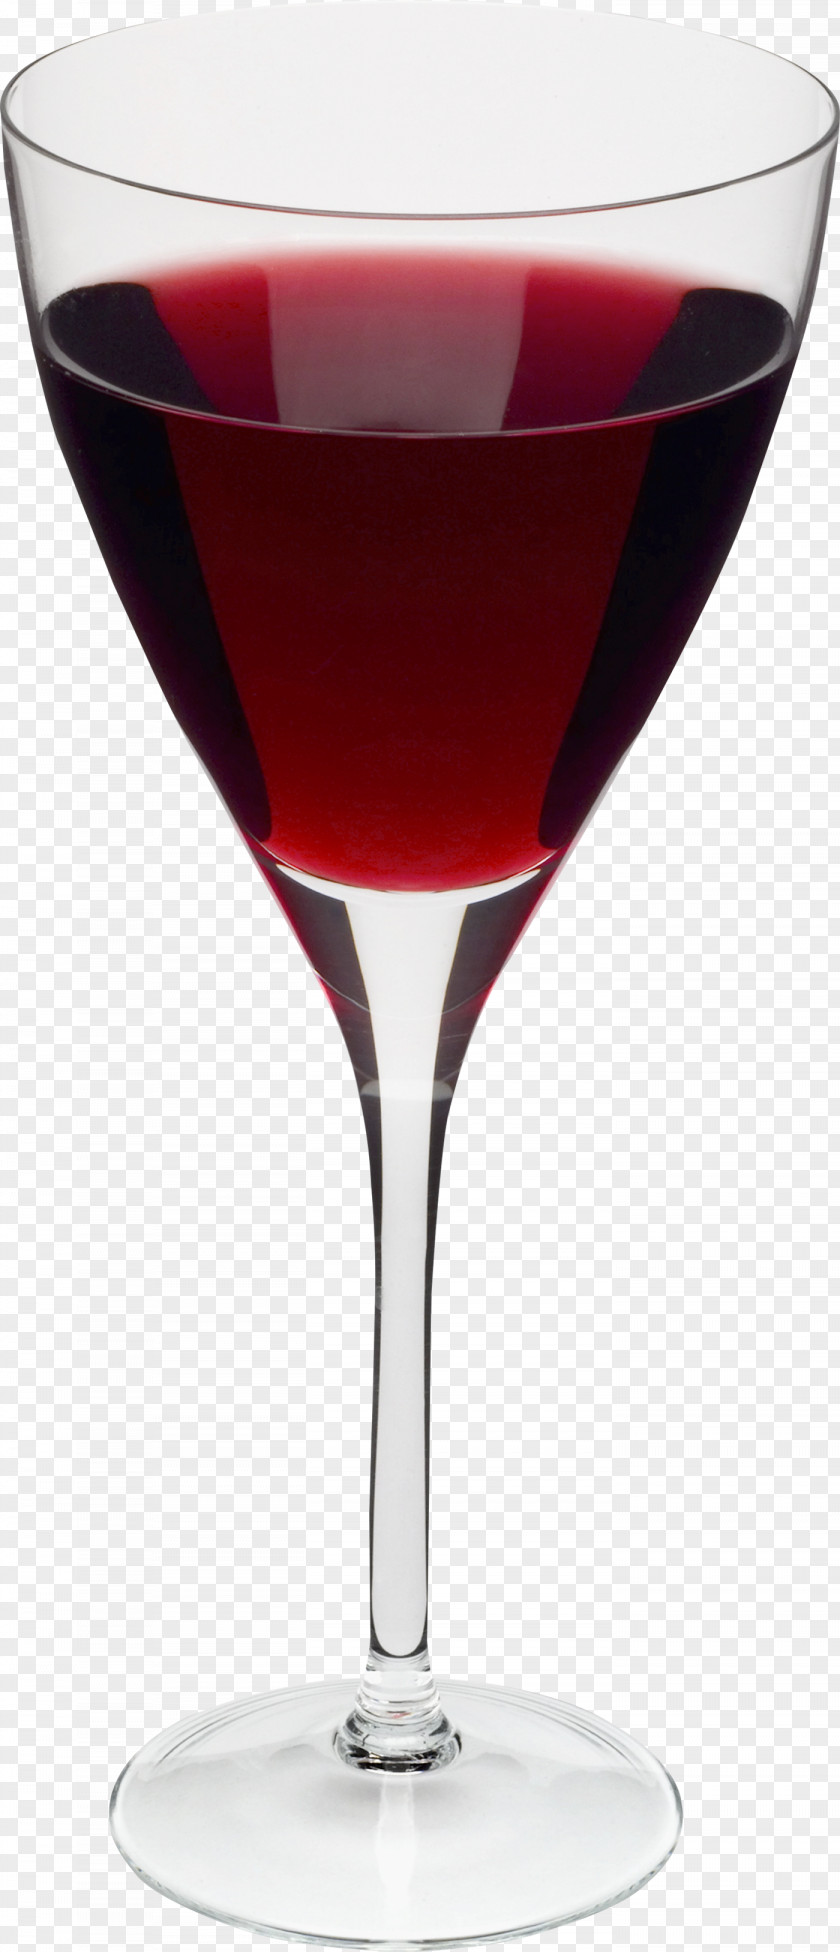 Wine Glass Image Cocktail Kir Rob Roy Manhattan Blood And Sand PNG